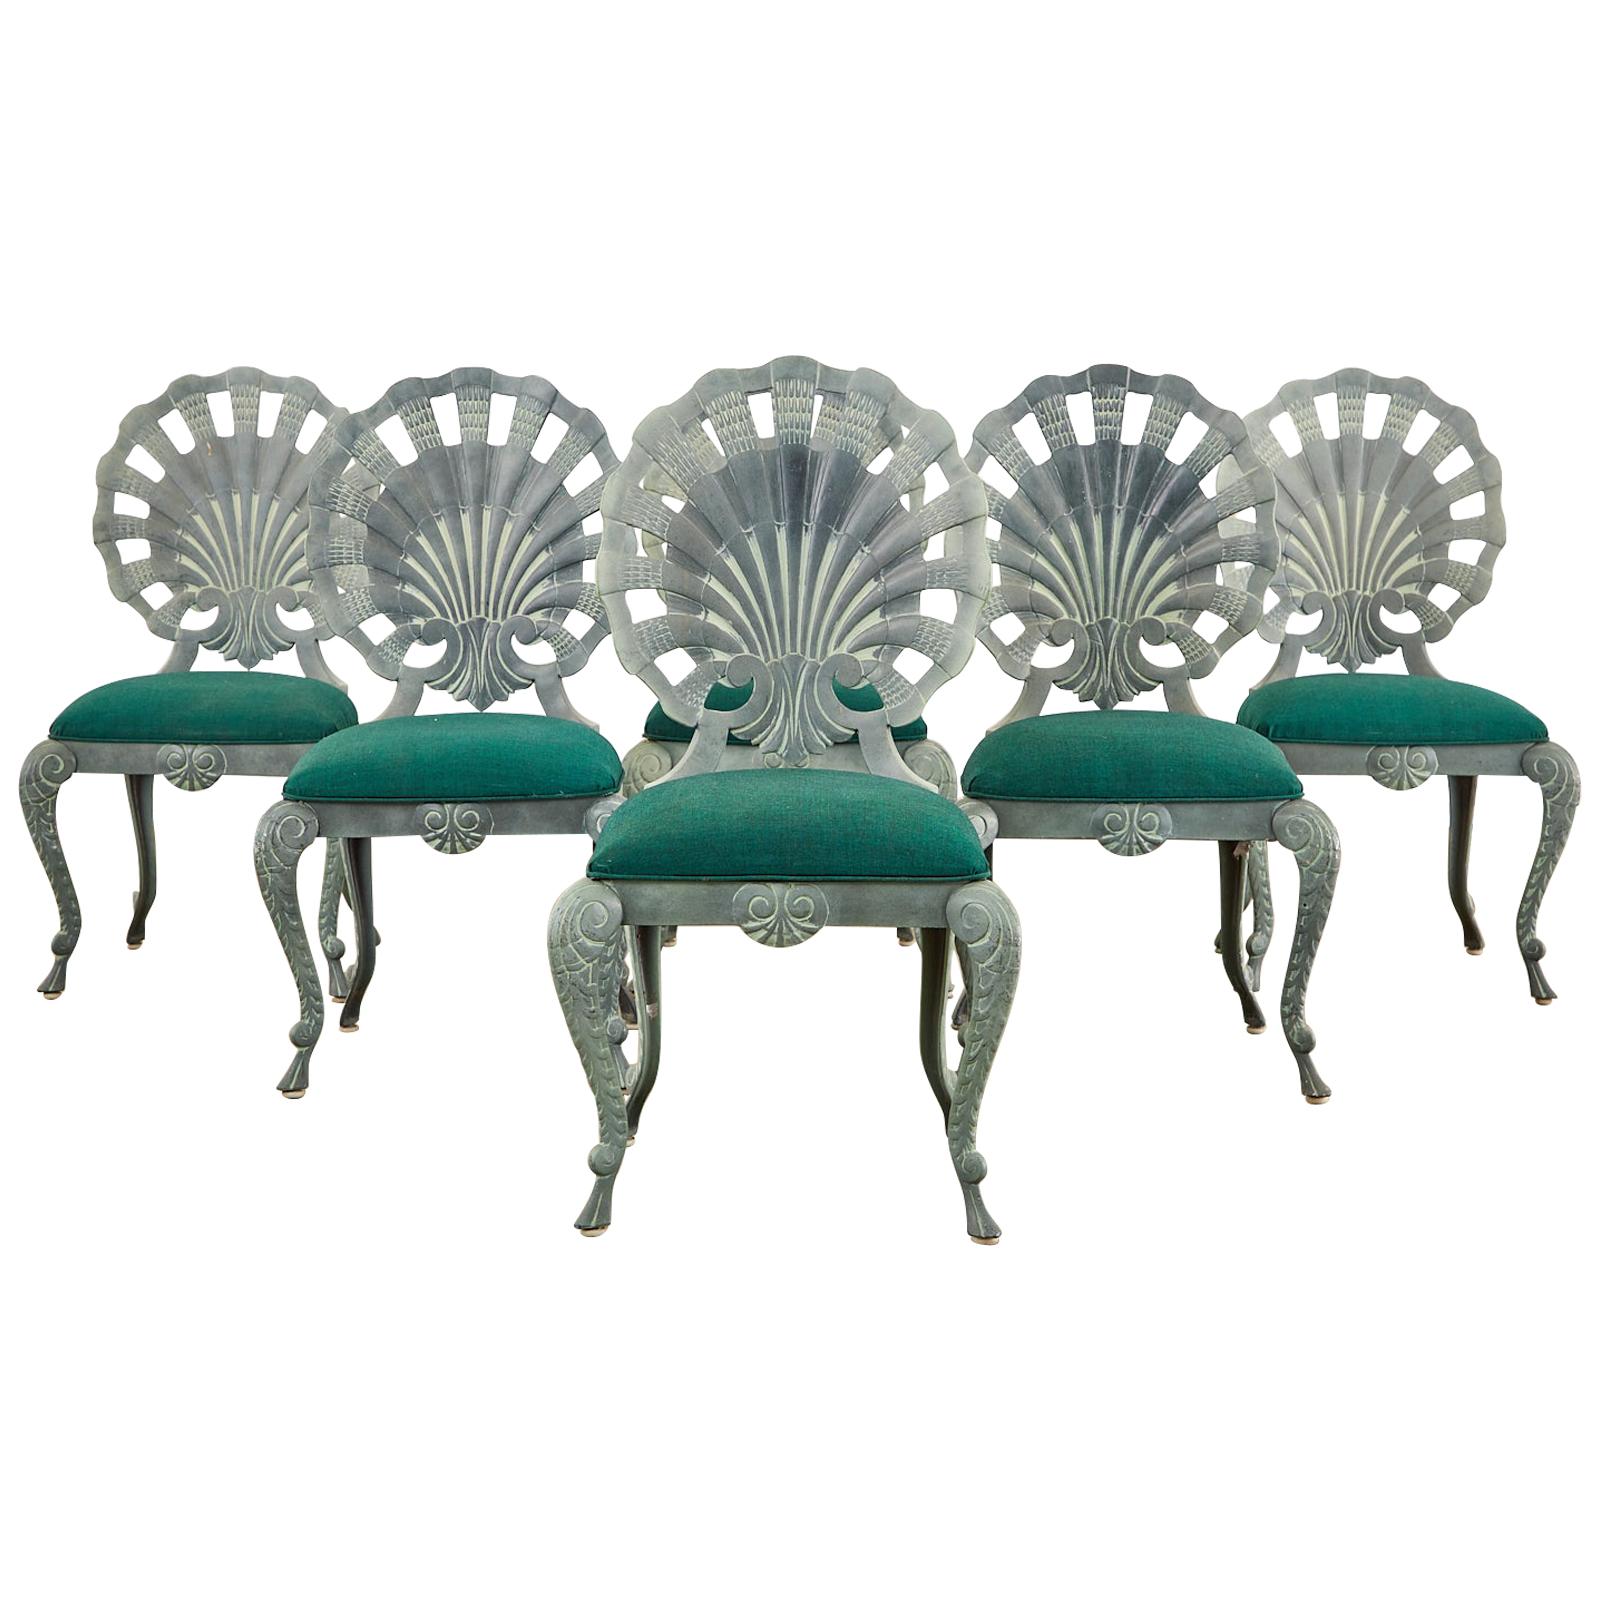 Set of Six Neoclassical Style Grotto Clamshell Garden Chairs